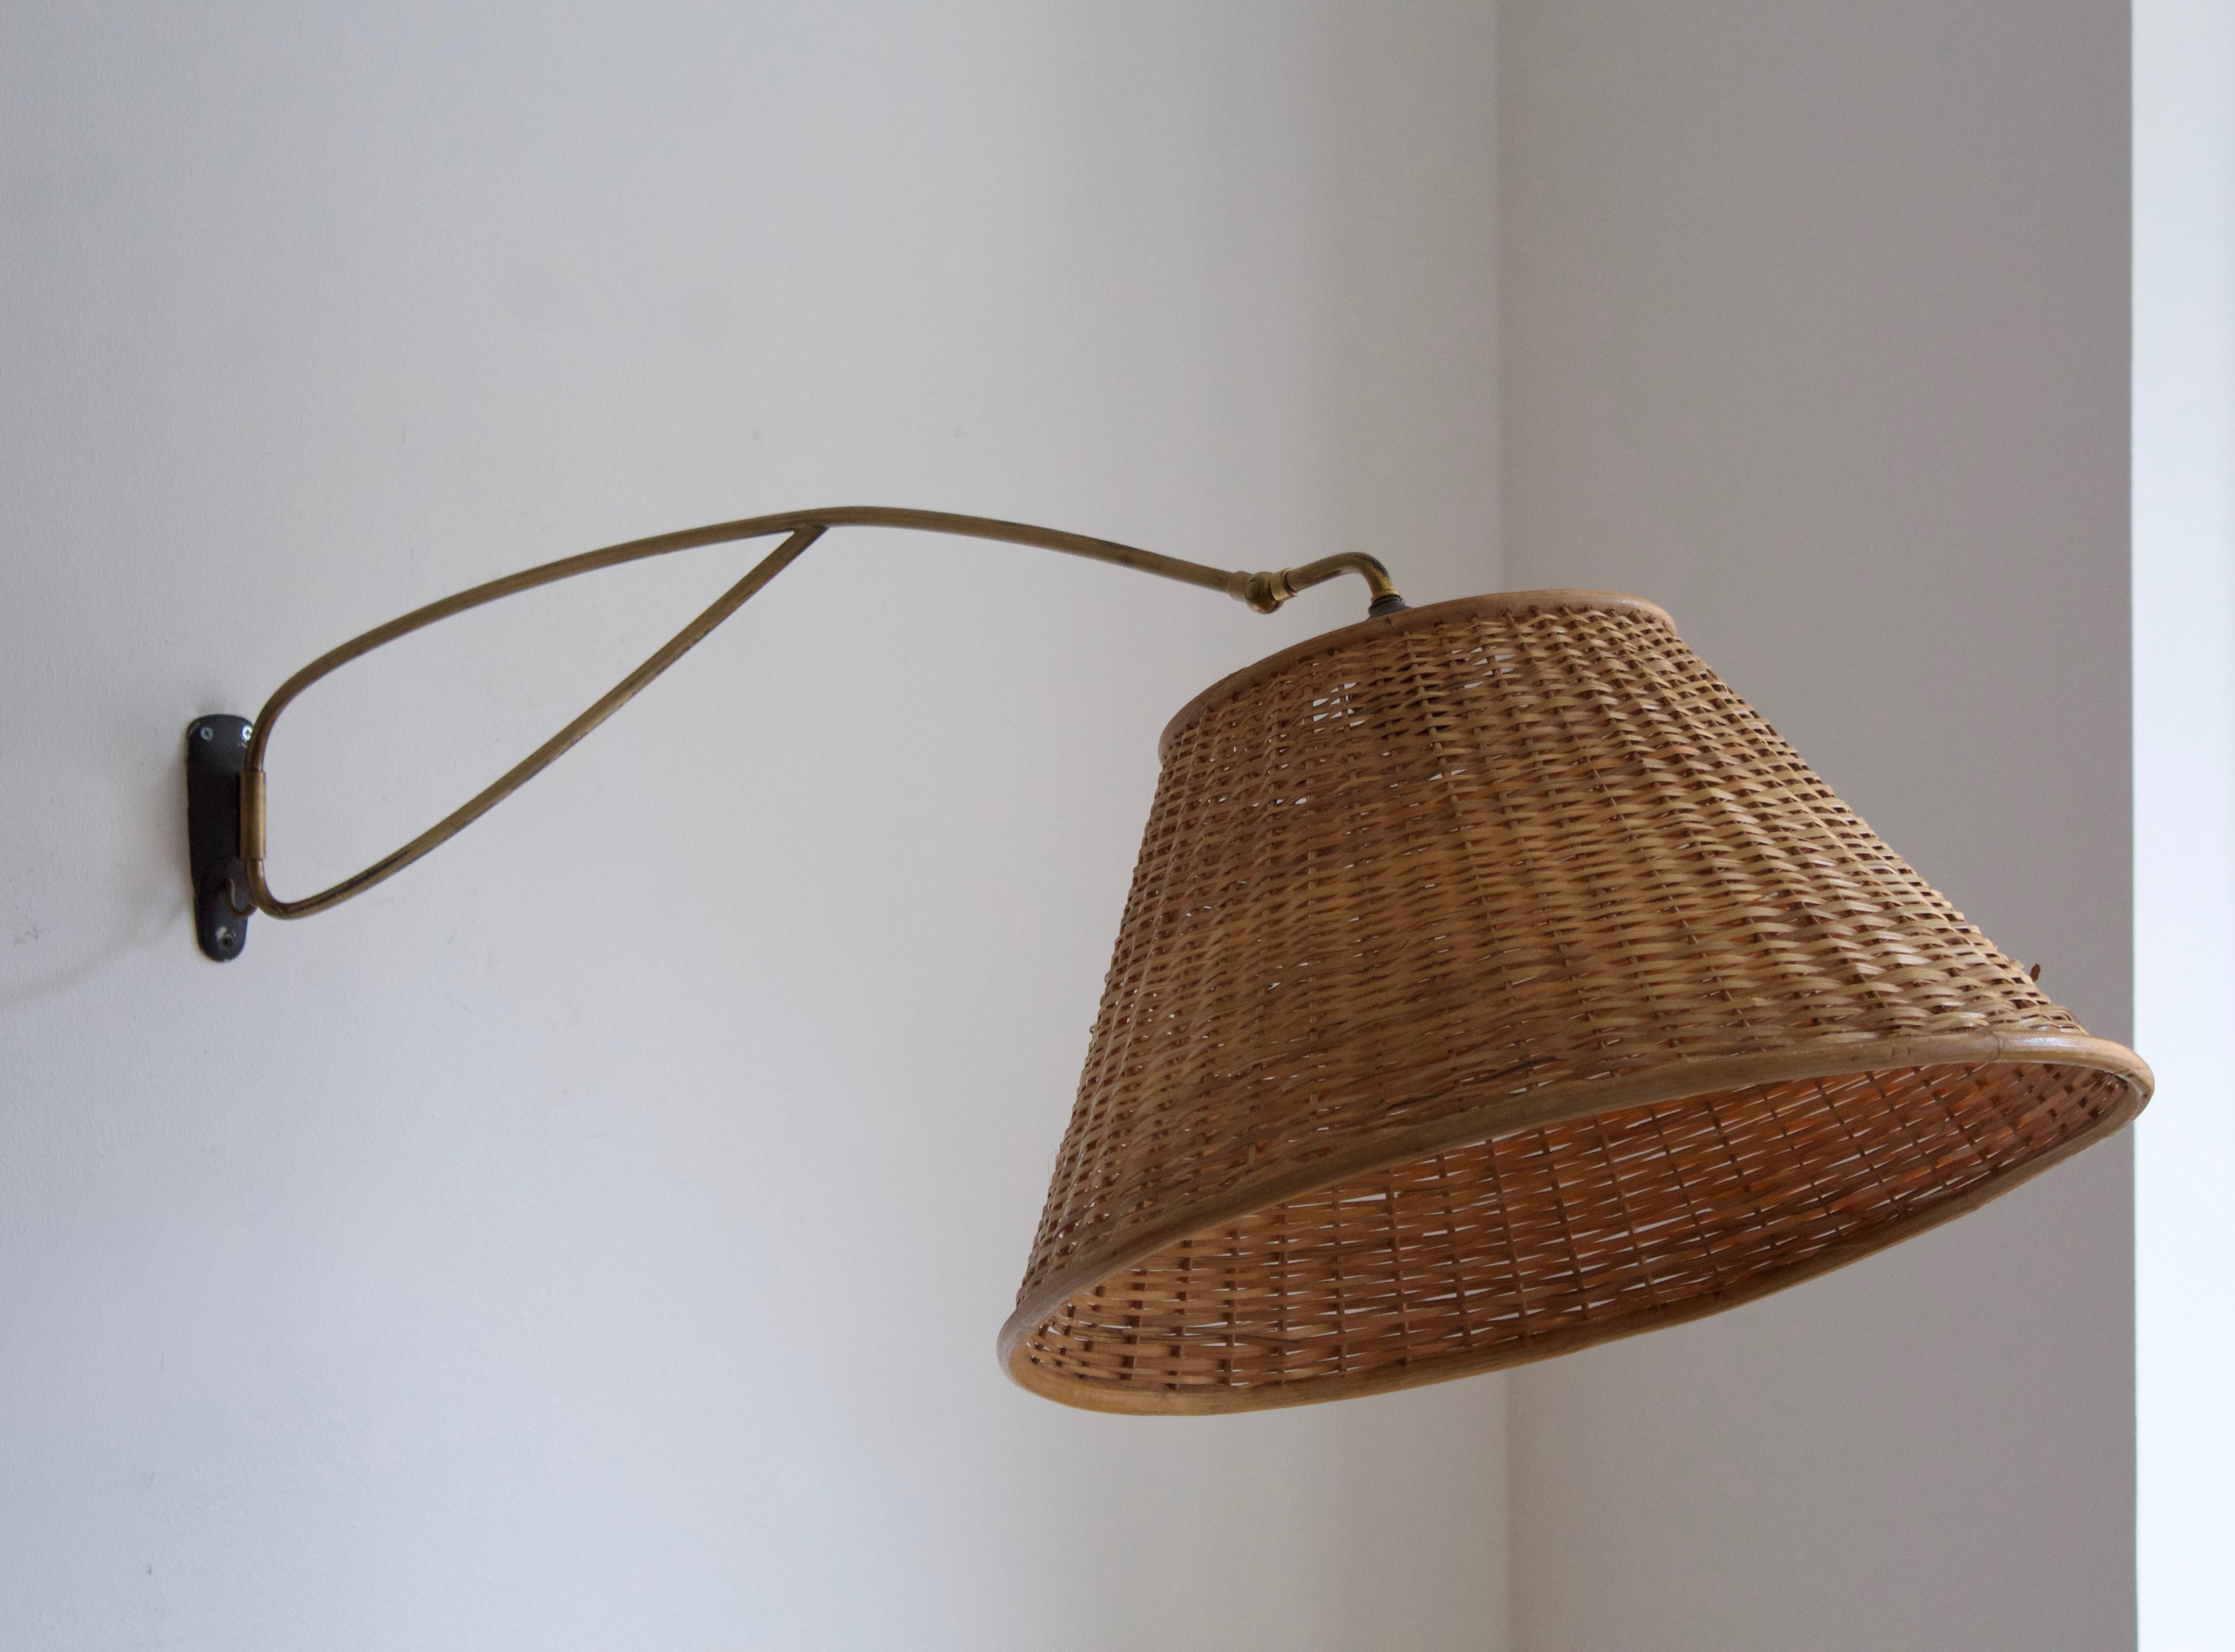 An adjustable functionalist wall light. Designed and produced in Austria, c. 1950s. In brass. Assorted vintage rattan lampshade.

Dimensions stated measured with lampshades attached.